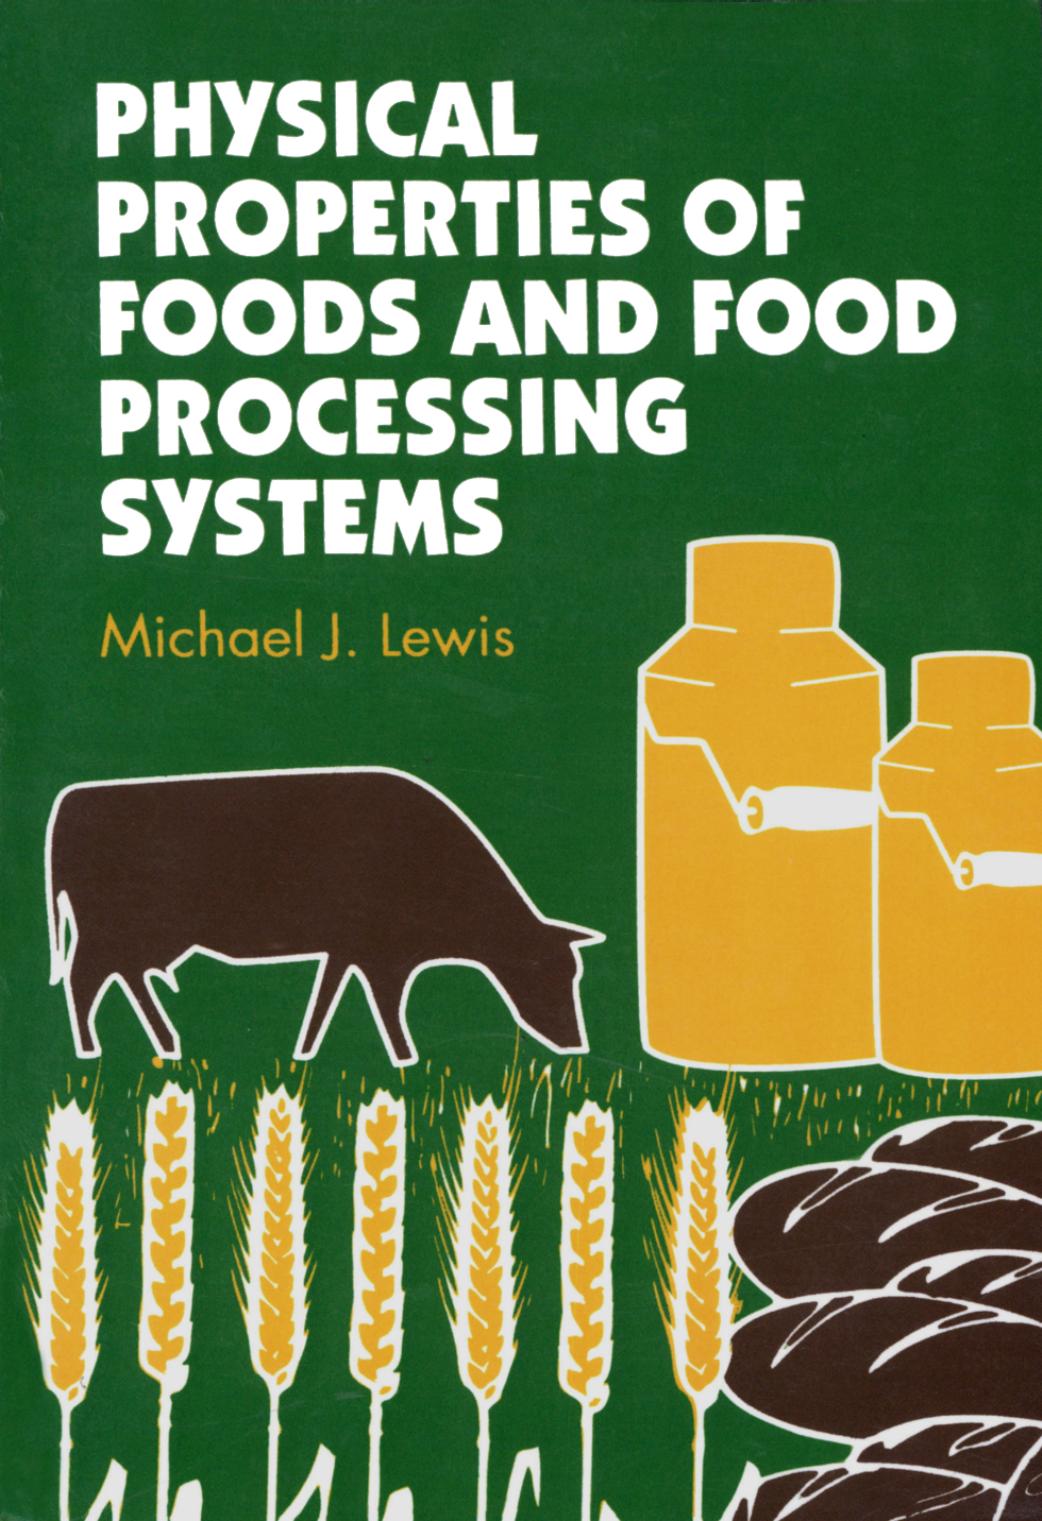 Physical Properties of Foods and Food Processing Systems (Woodhead Publishing Series in Food Science, Technology and Nutrition) 1996